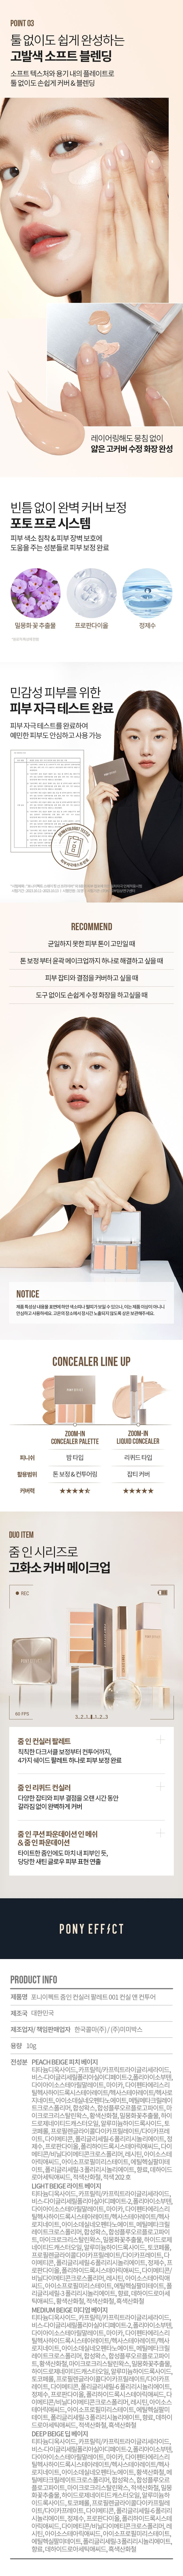 MEMEBOX Pony Effect Zoom In Concealer Palette korean skincare product online shop malaysia china macau2